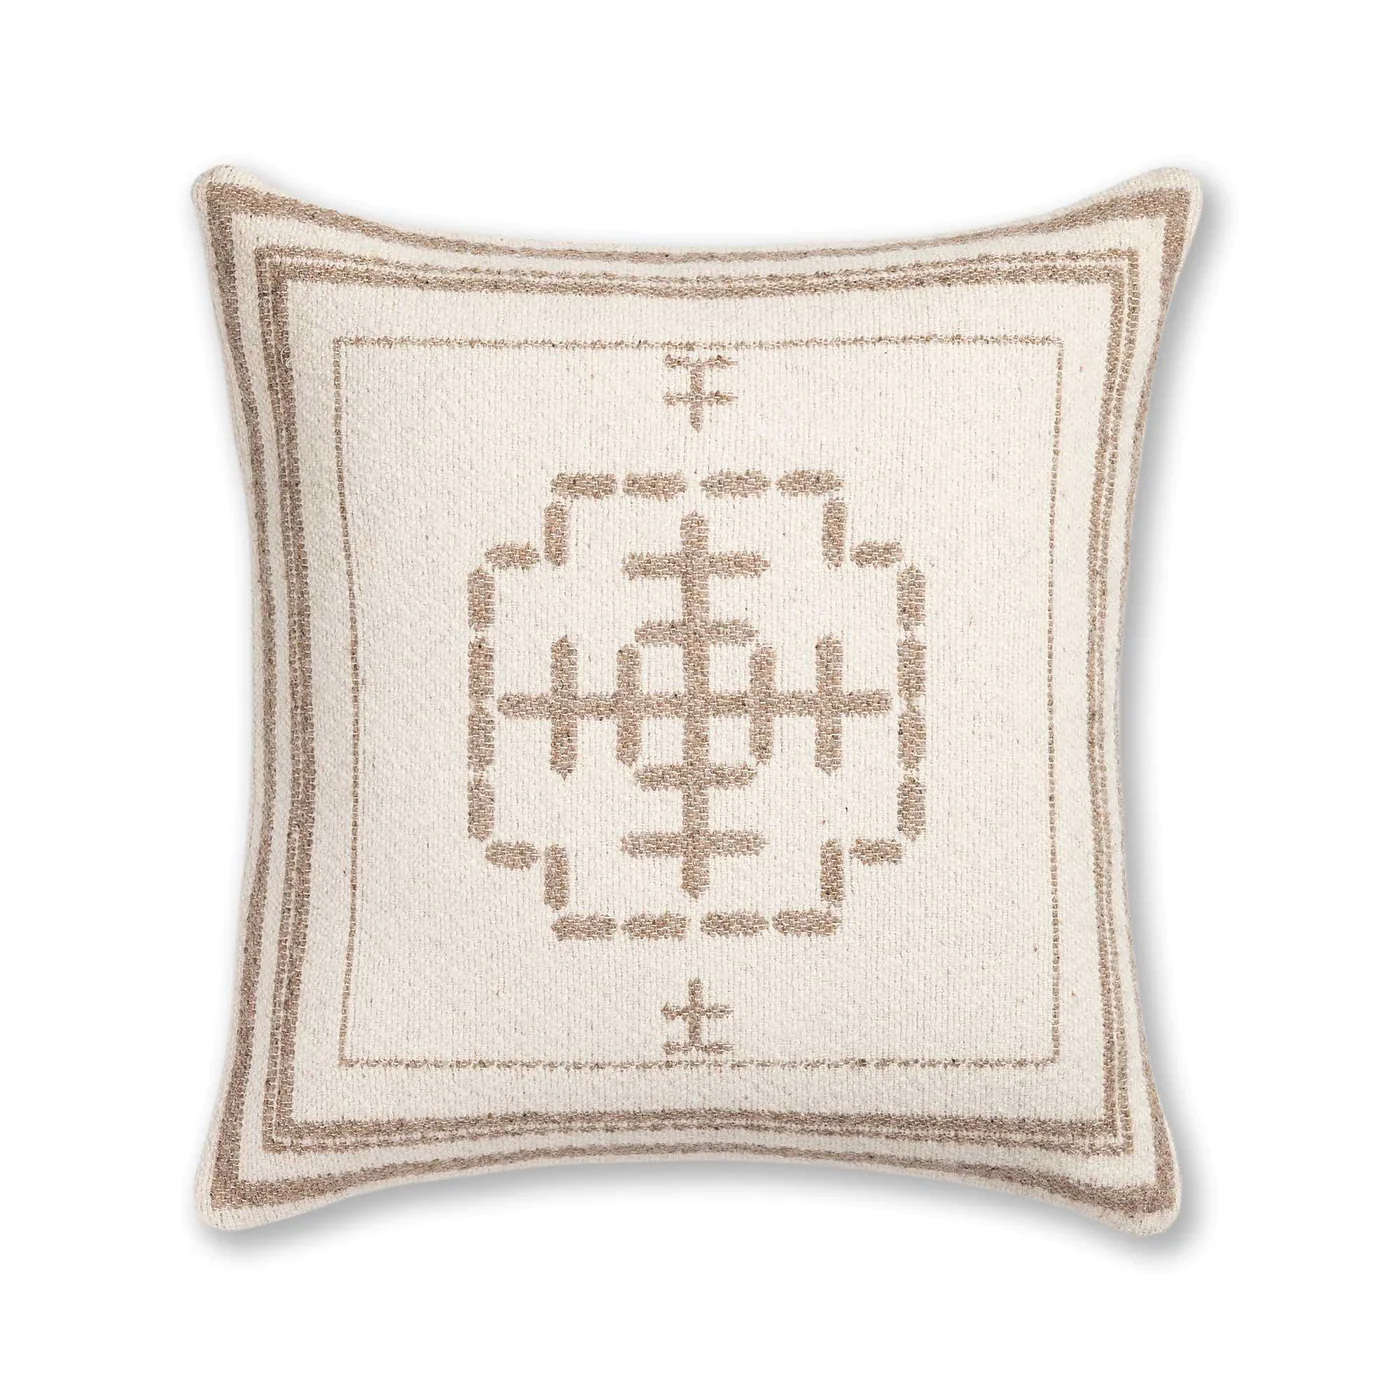 Mazing Alpaca Pillow in Taupe